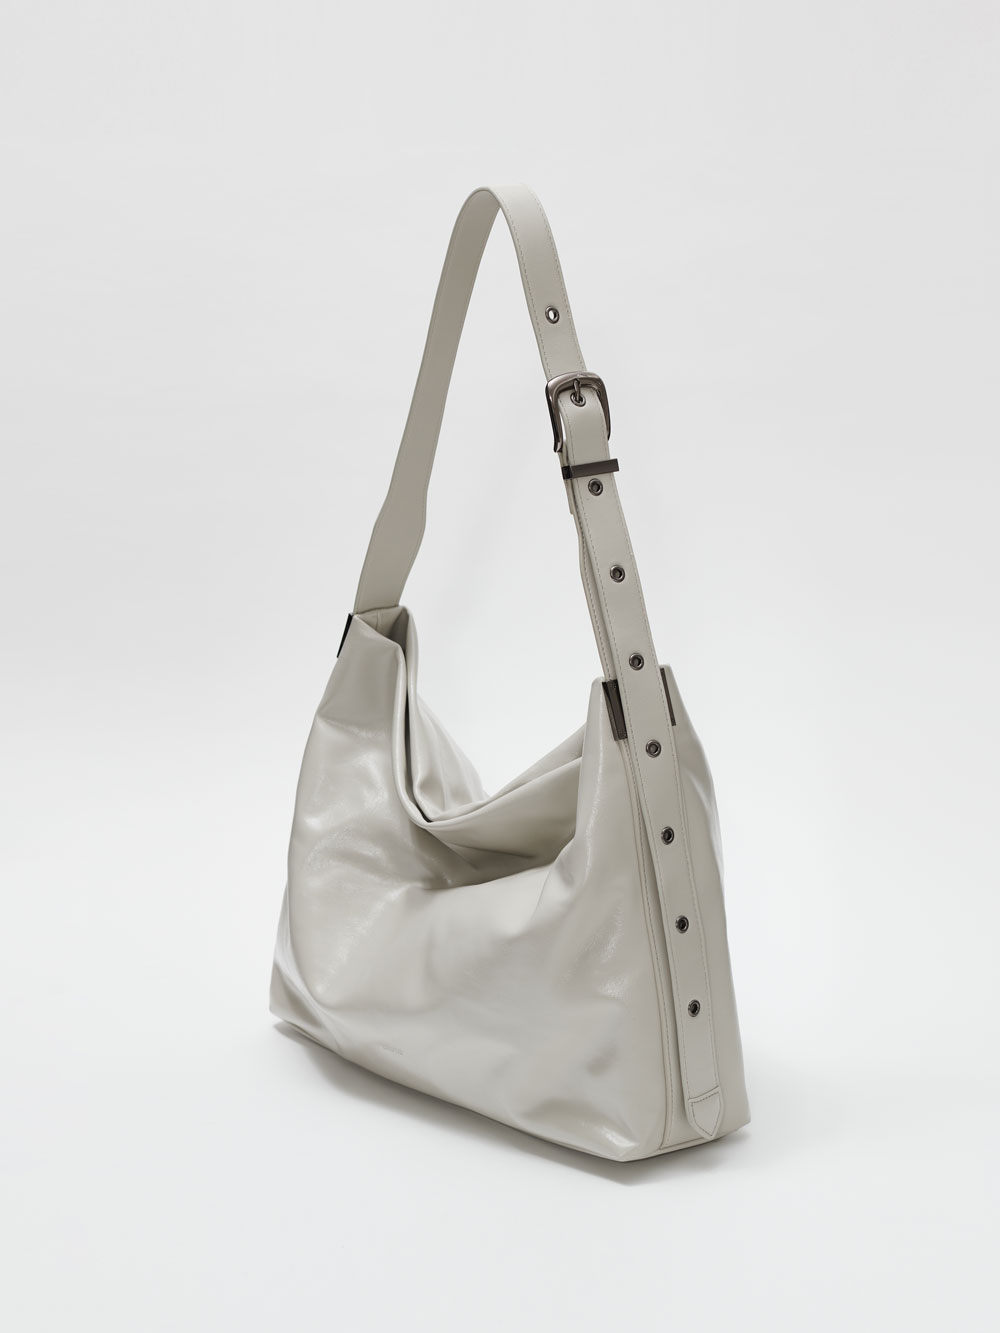 Willy bag ASH IVORY